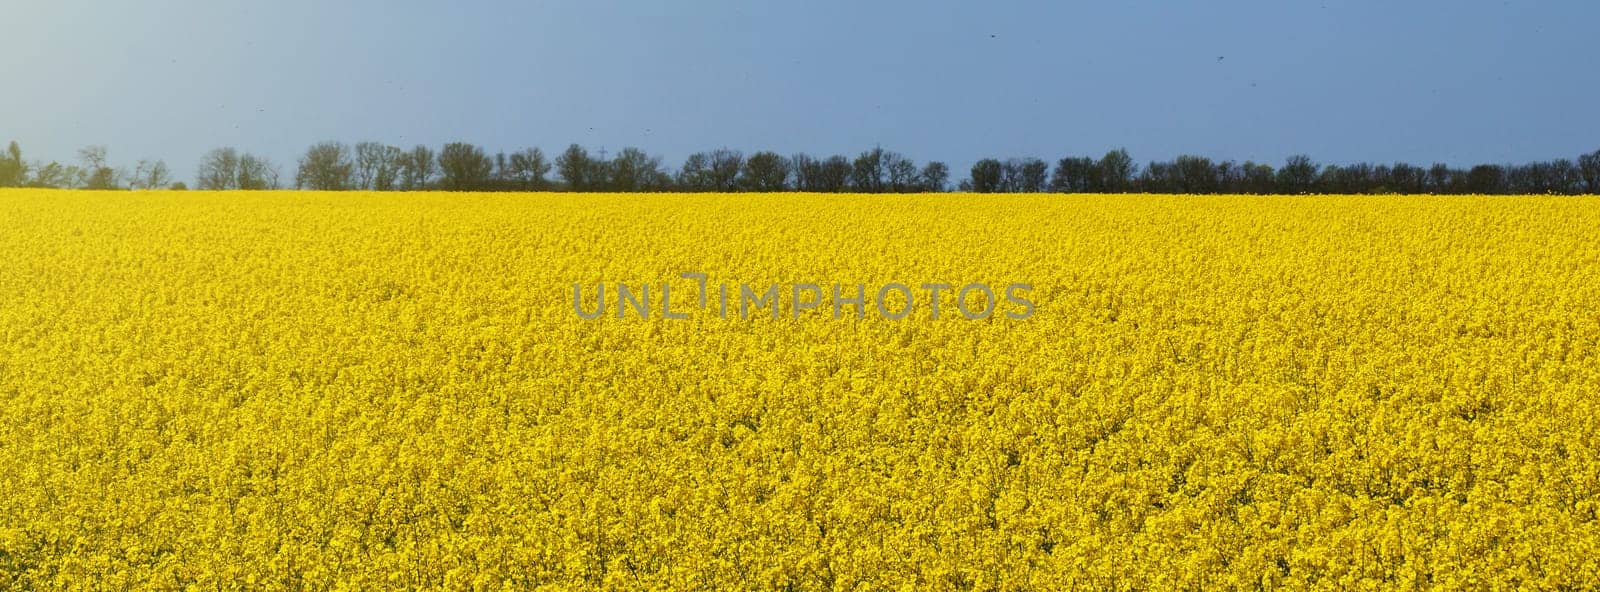 Yellow field of blooming rapeseed and blue sky by Annado